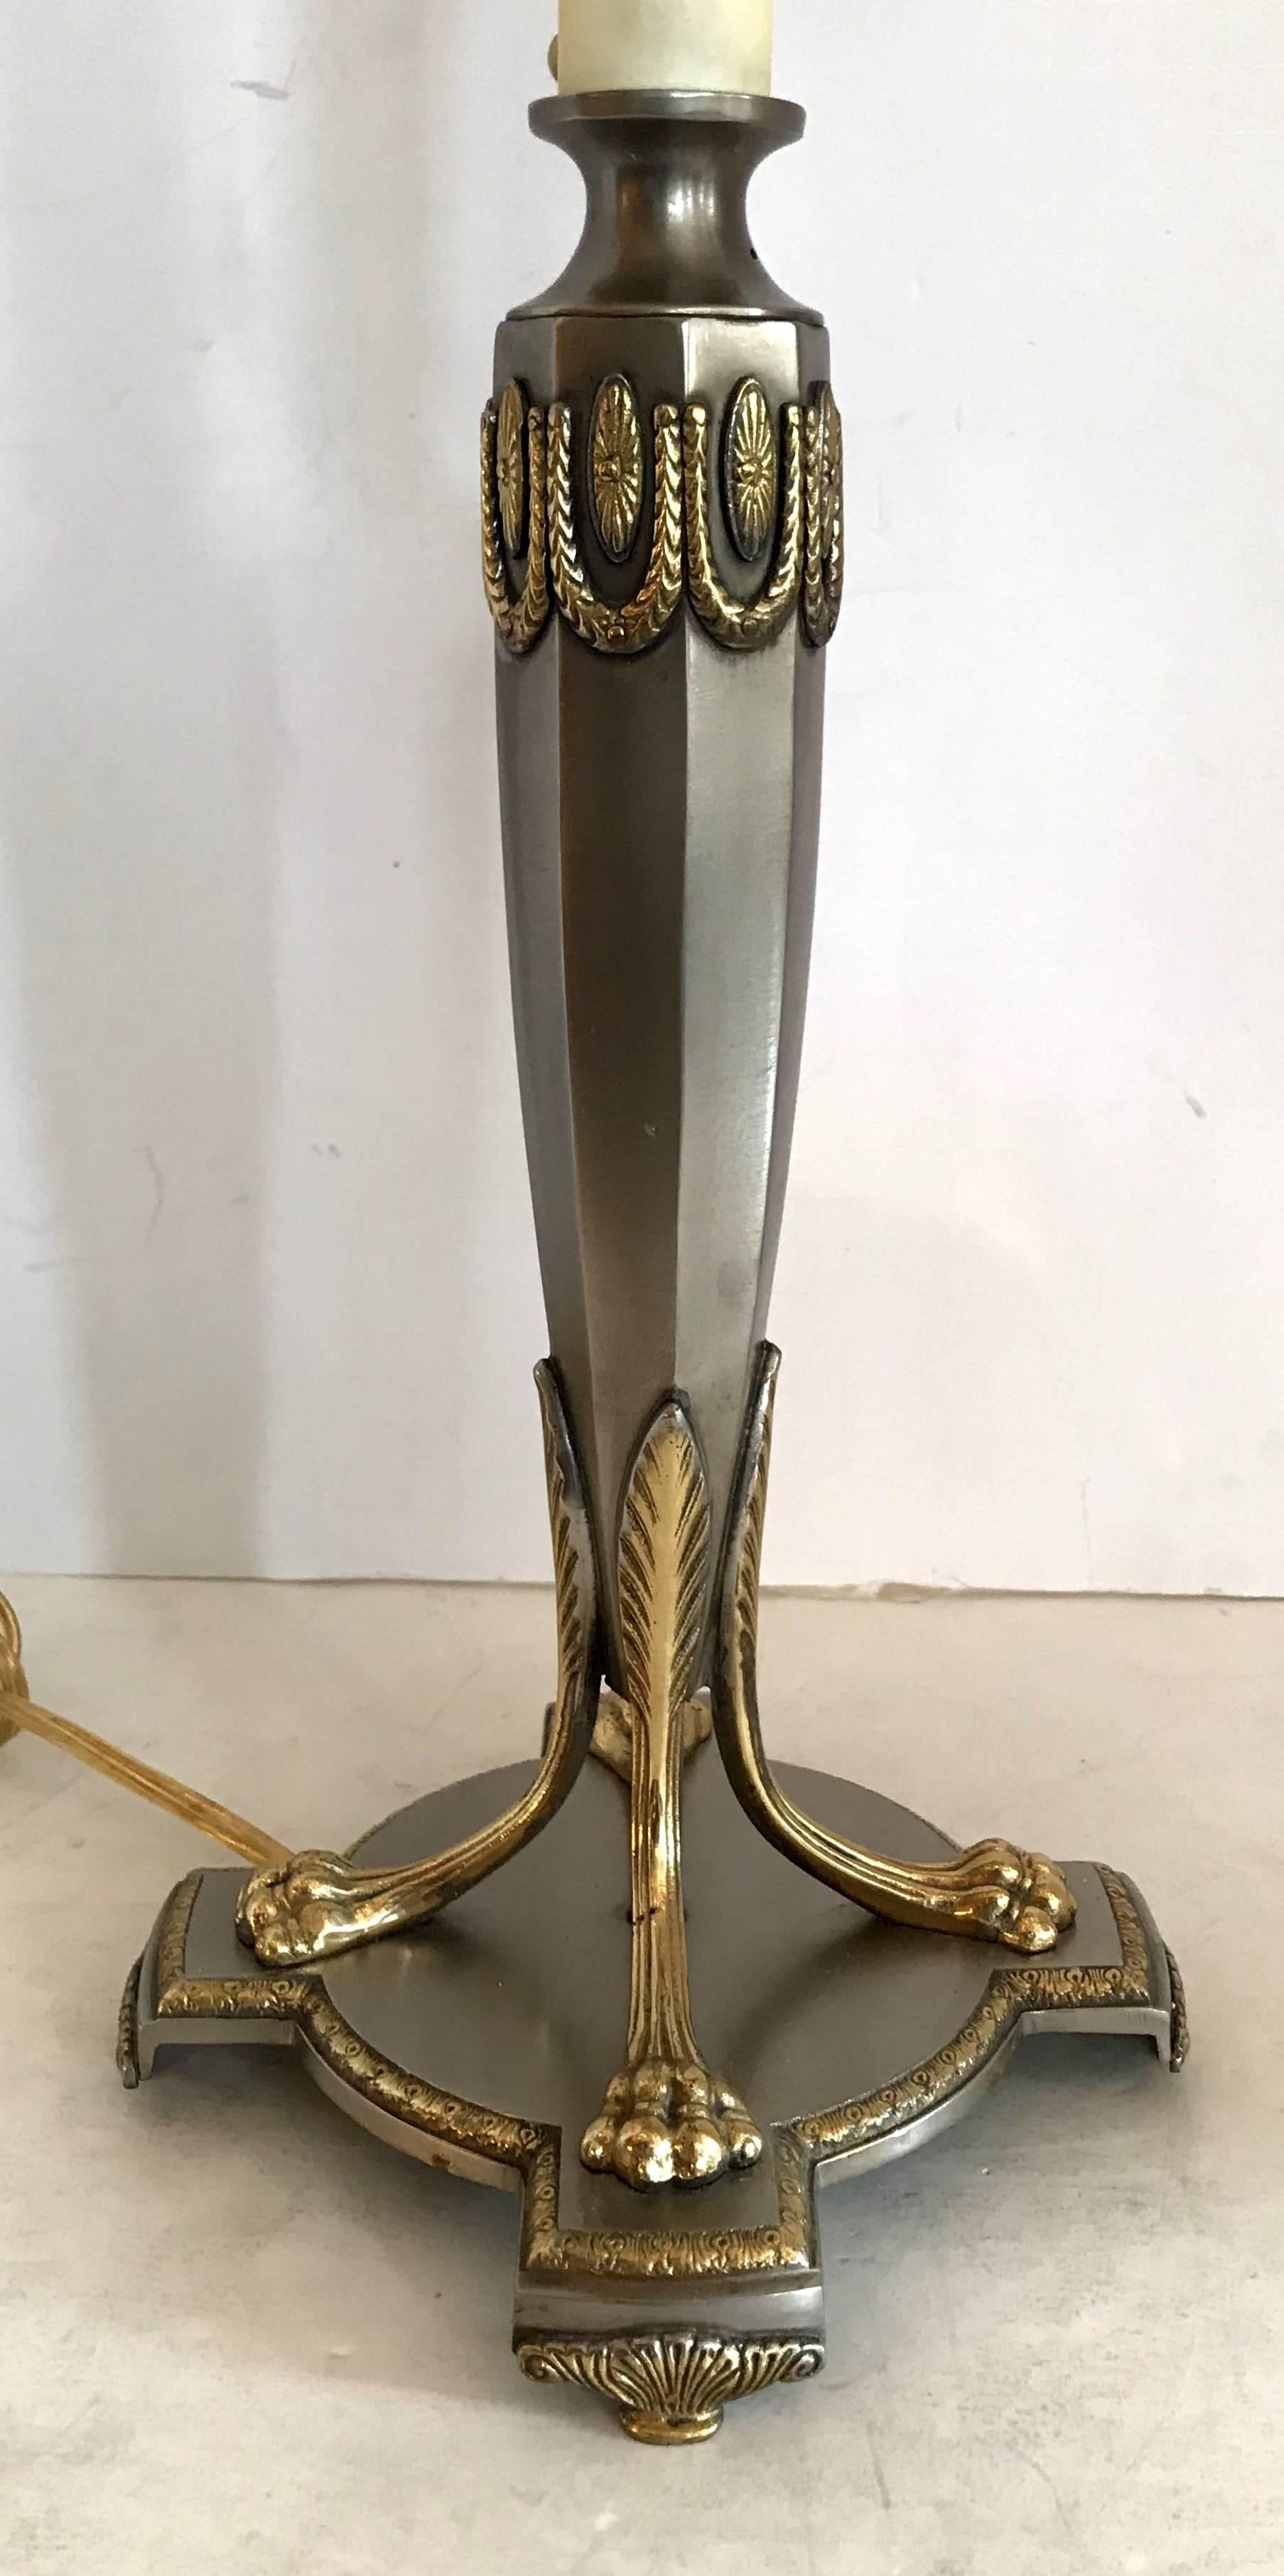 A Wonderful Brushed Silver and Gilt Bronze Swag Neoclassical / Regency Paw Foot Lamp In The Manner Of E.F. Caldwell With Wreath Finial, Rewired And Ready To Enjoy.